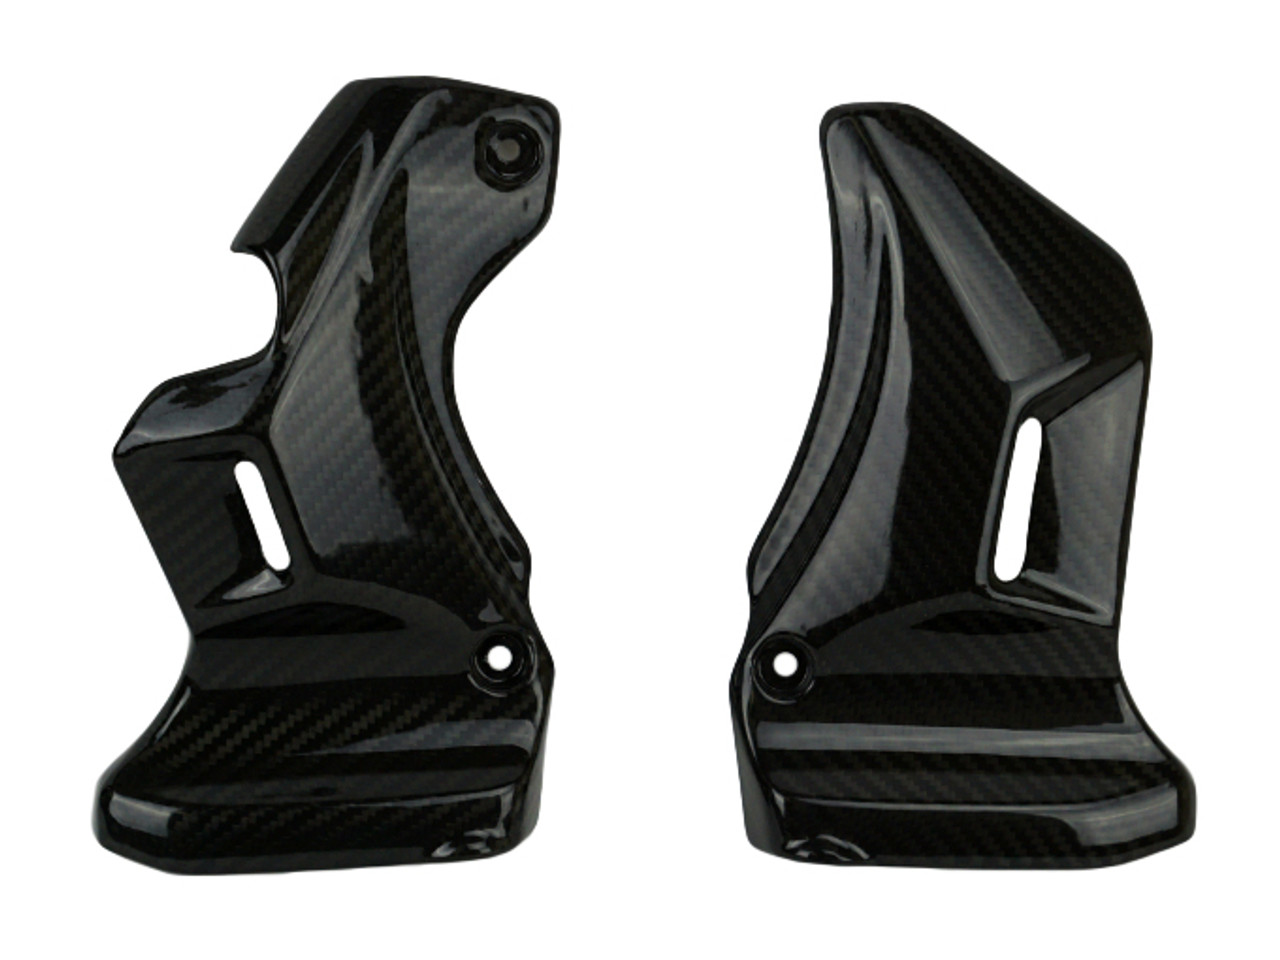 Frame Covers ( at Steering Head ) in Glossy Twill Weave Carbon Fiber for Kawasaki Z900RS